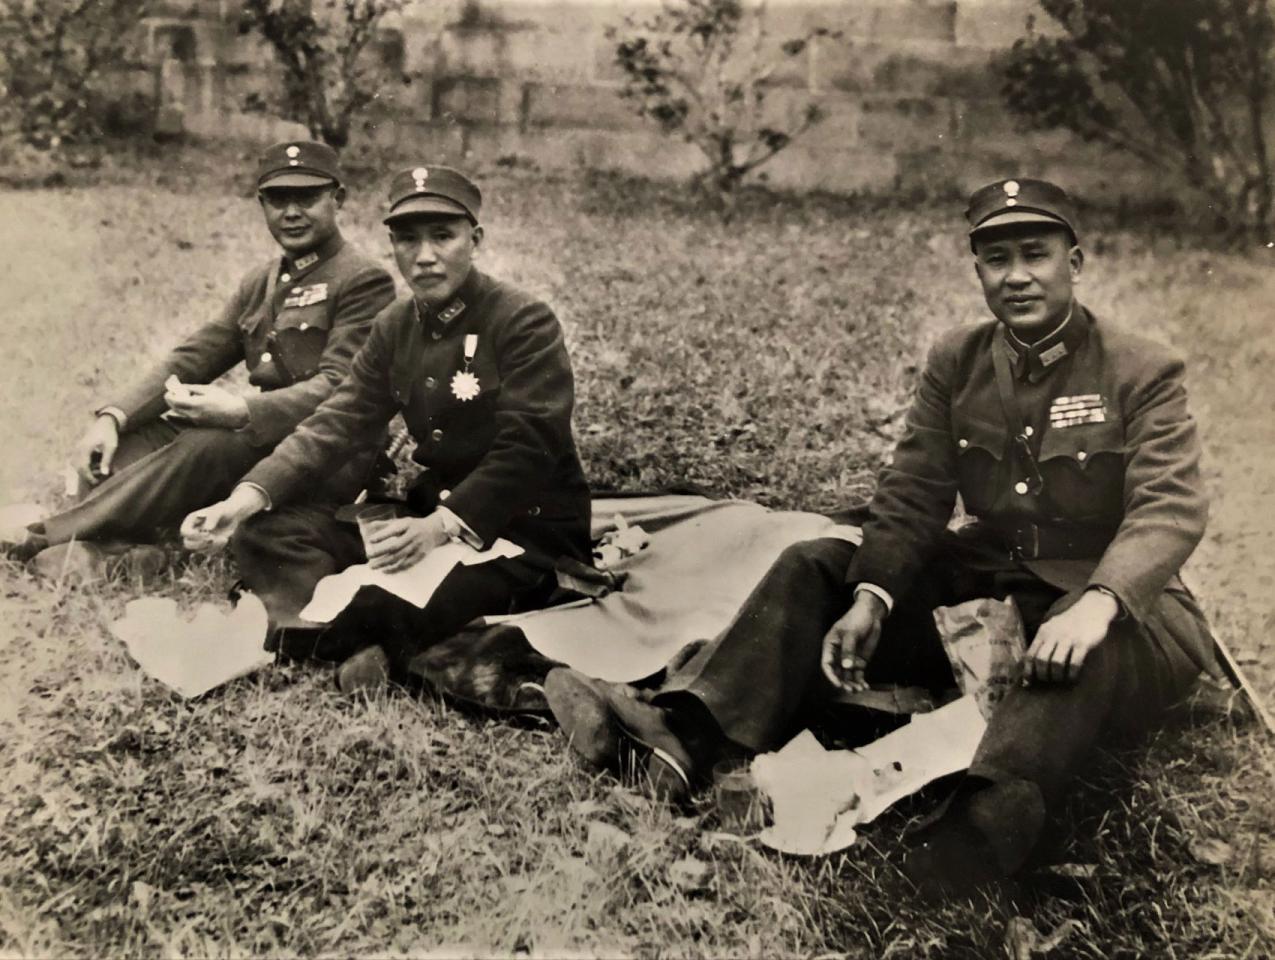 Black and white photo of 3 men dressed in military uniforms sitting on the ground having a picnic.